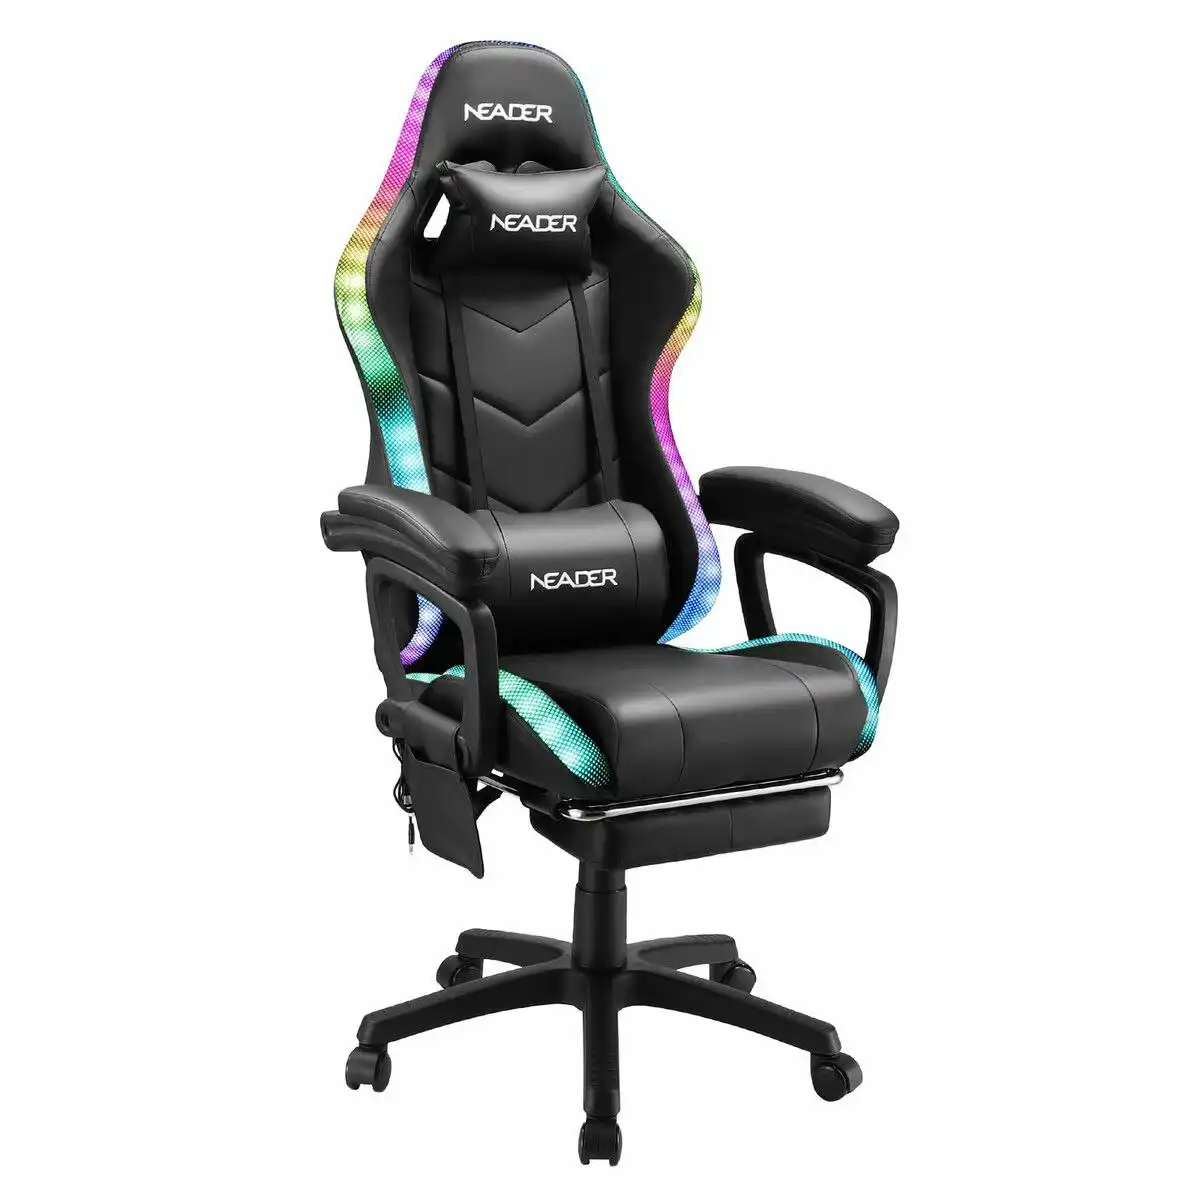 Neader Gaming Office Chair Massage High Back RGB LED Armchair Executive Computer Racing Desk PU Leather Footrest Headrest Recliner Work Study Black